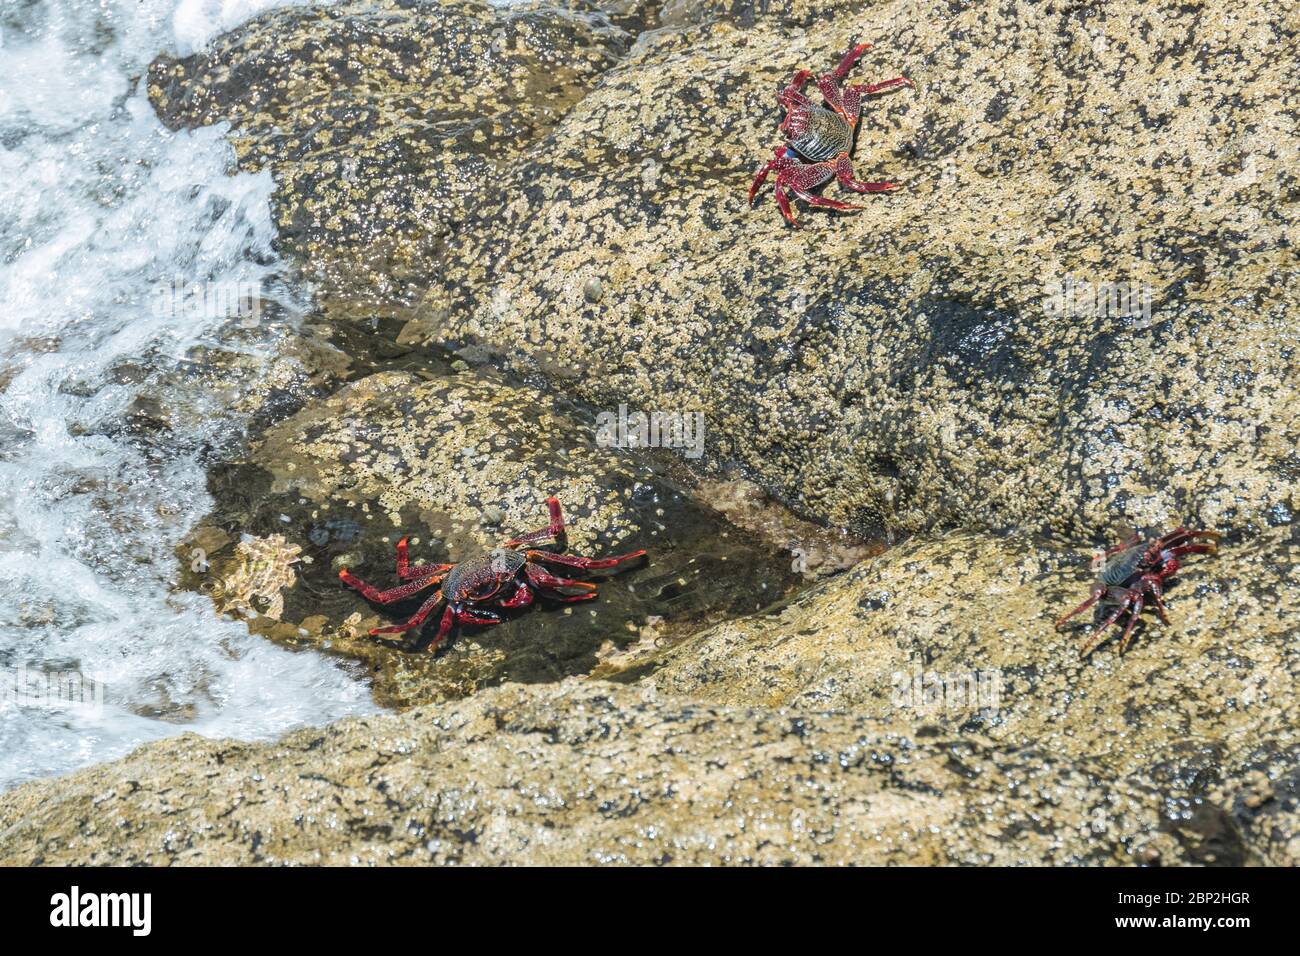 Red rock crab - Grapsus adscensionis - crawling on wet lava stones close to the sea to bask in the sun. Southern ocean shore of Tenerife, Canary Islan Stock Photo